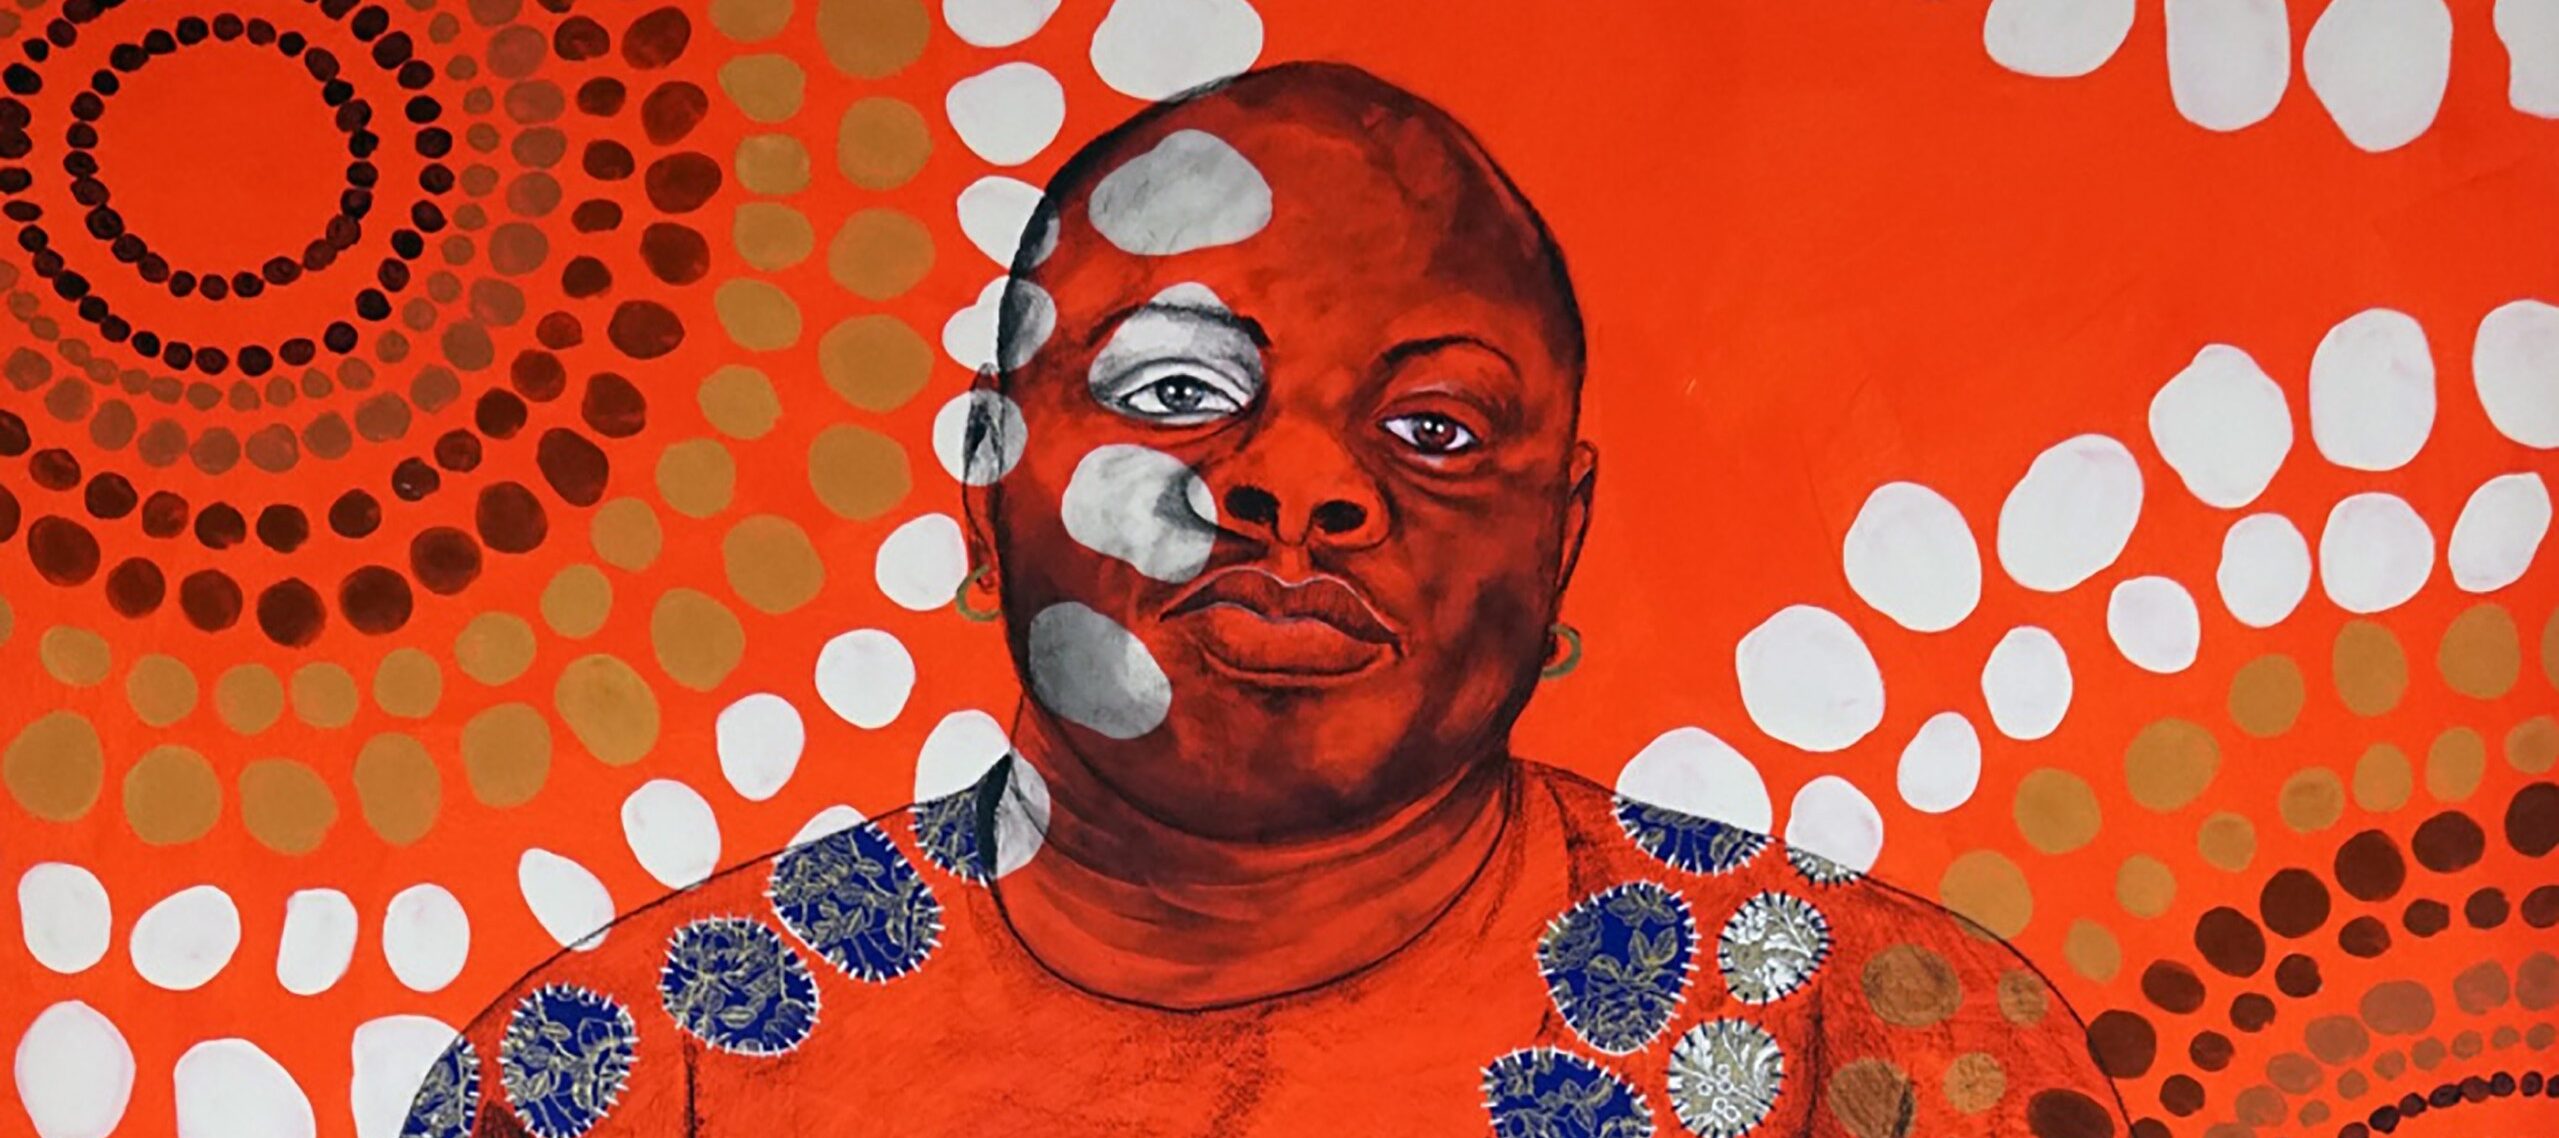 In this mixed-media painting, awash in bright orange, a seated, heavy-set, dark-skinned man stares confidently at the viewer. An overlaid pattern of white, blue, and brown circles covers him and the background.